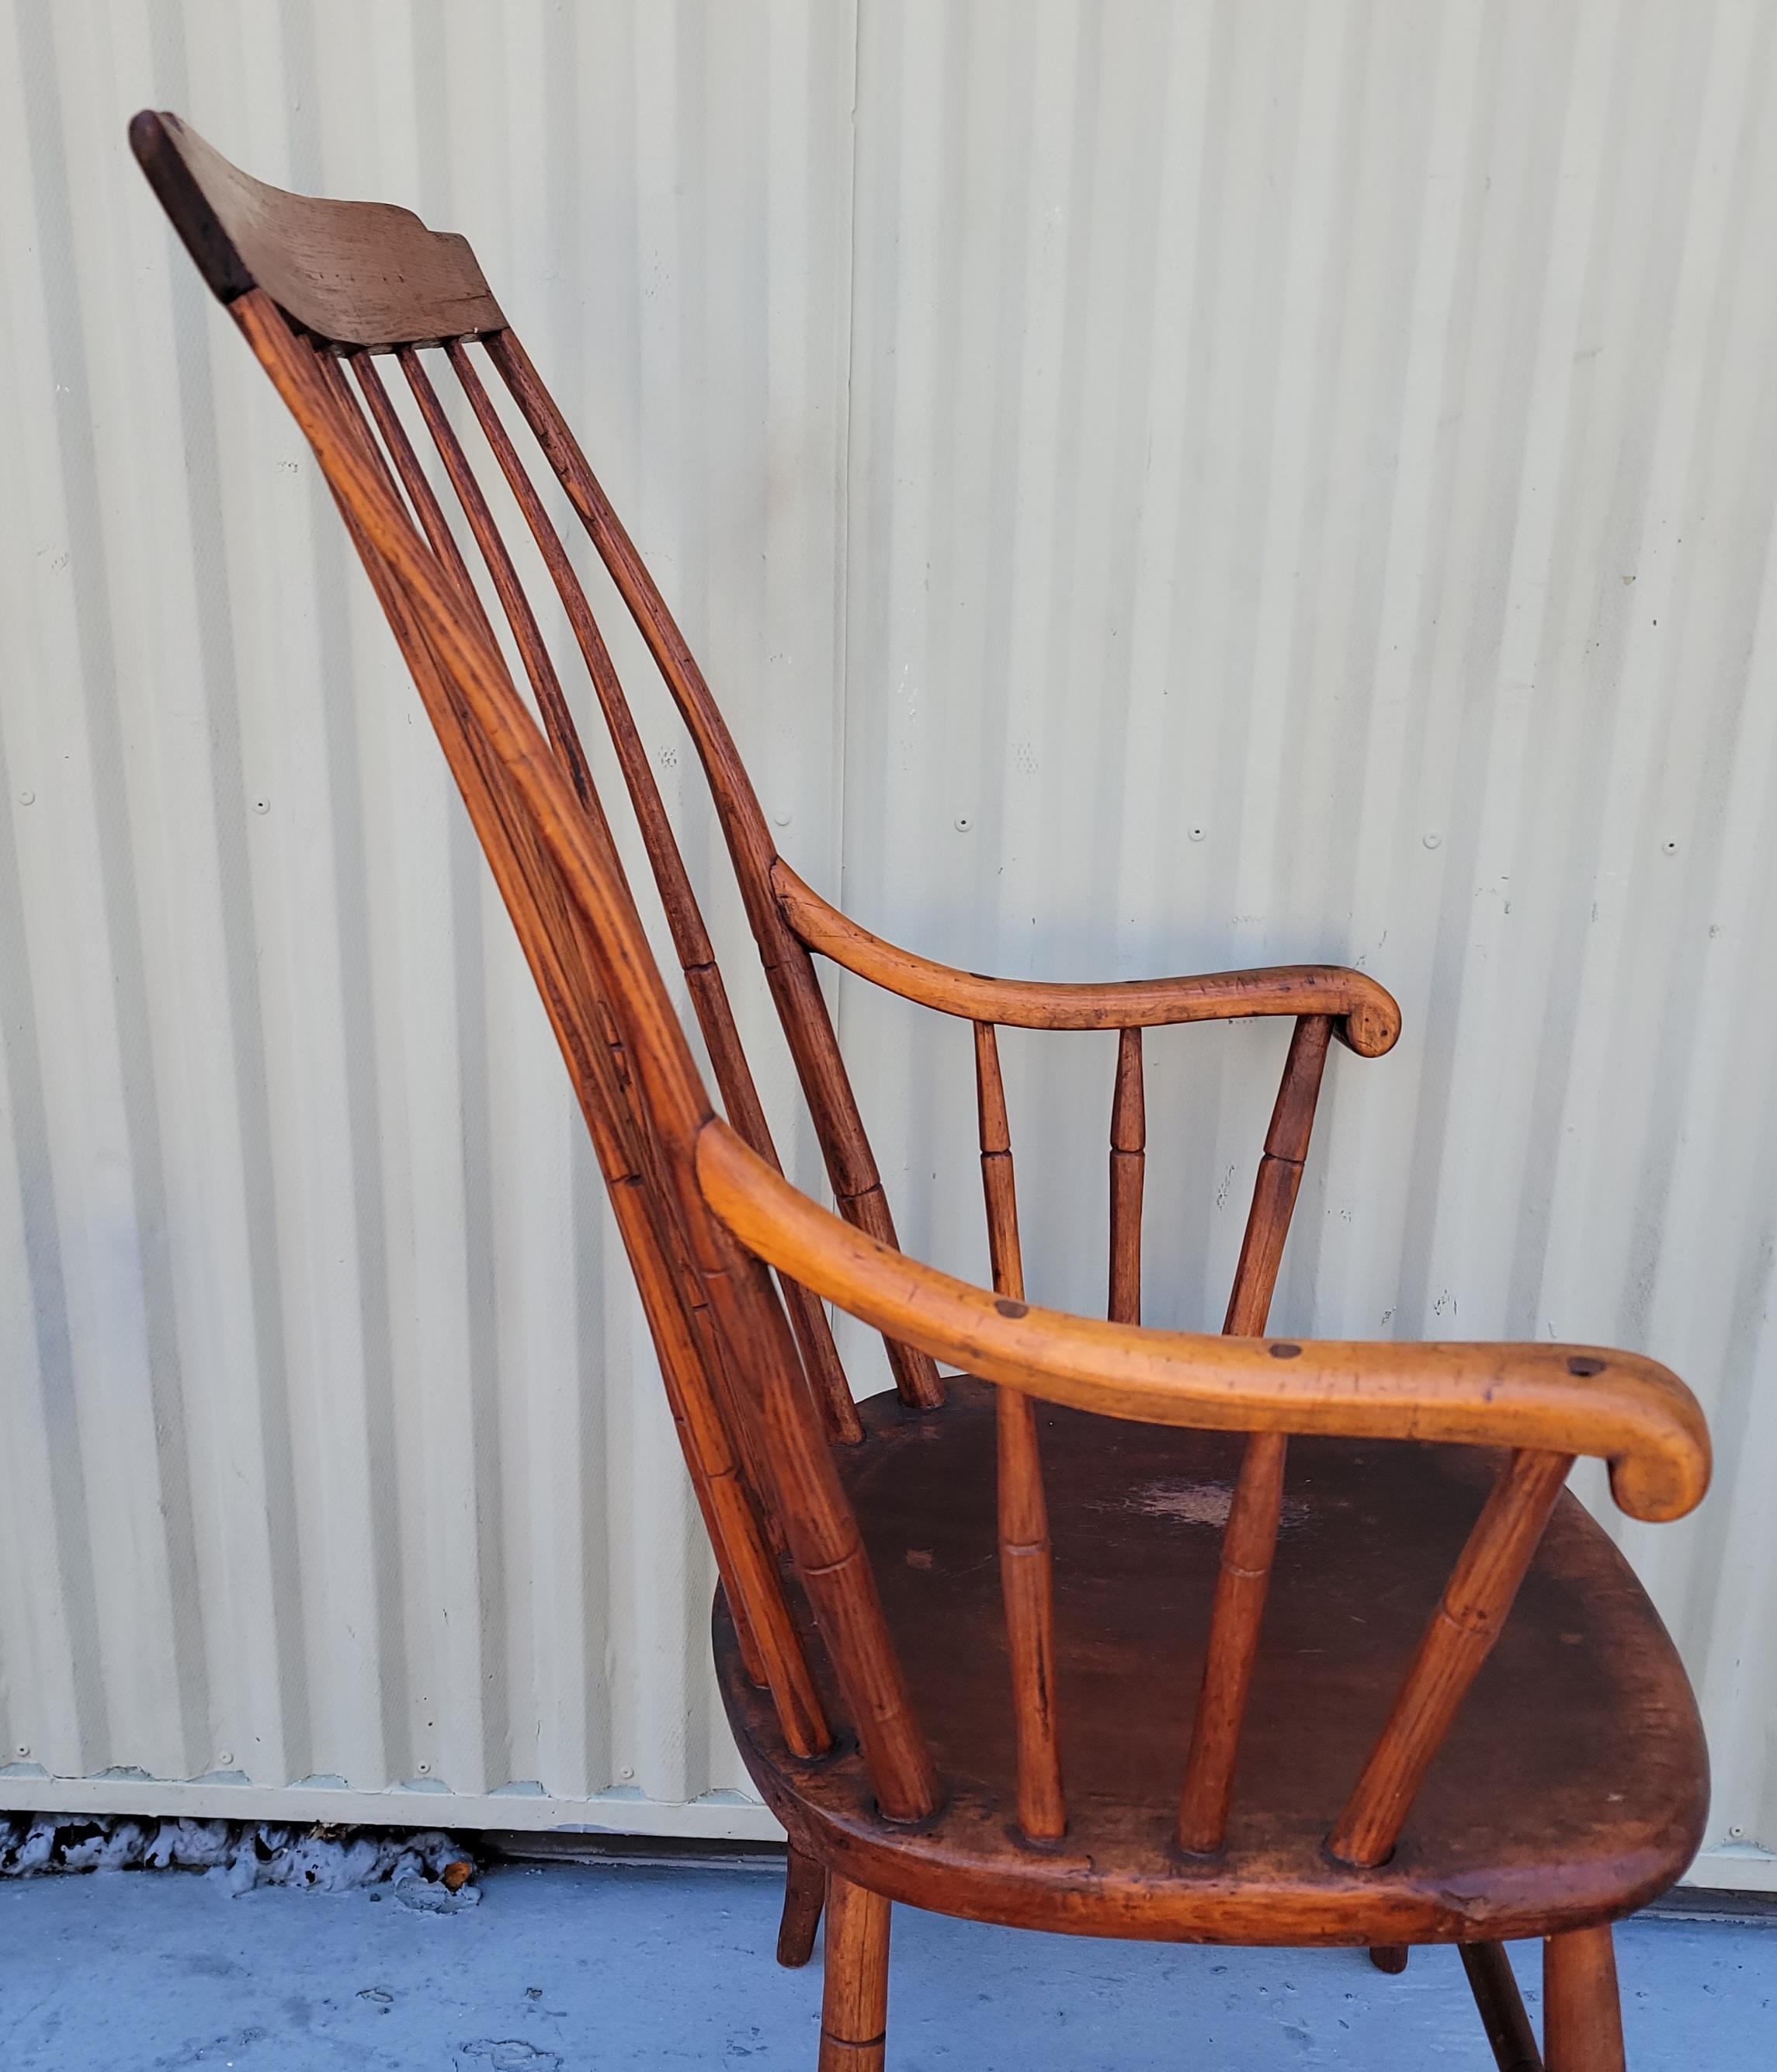 19th C High back Windsor New England arm chair is in fantastic condition and very comfortable. This fine chair has mortised & pegged arms & legs.The construction is fantastic.